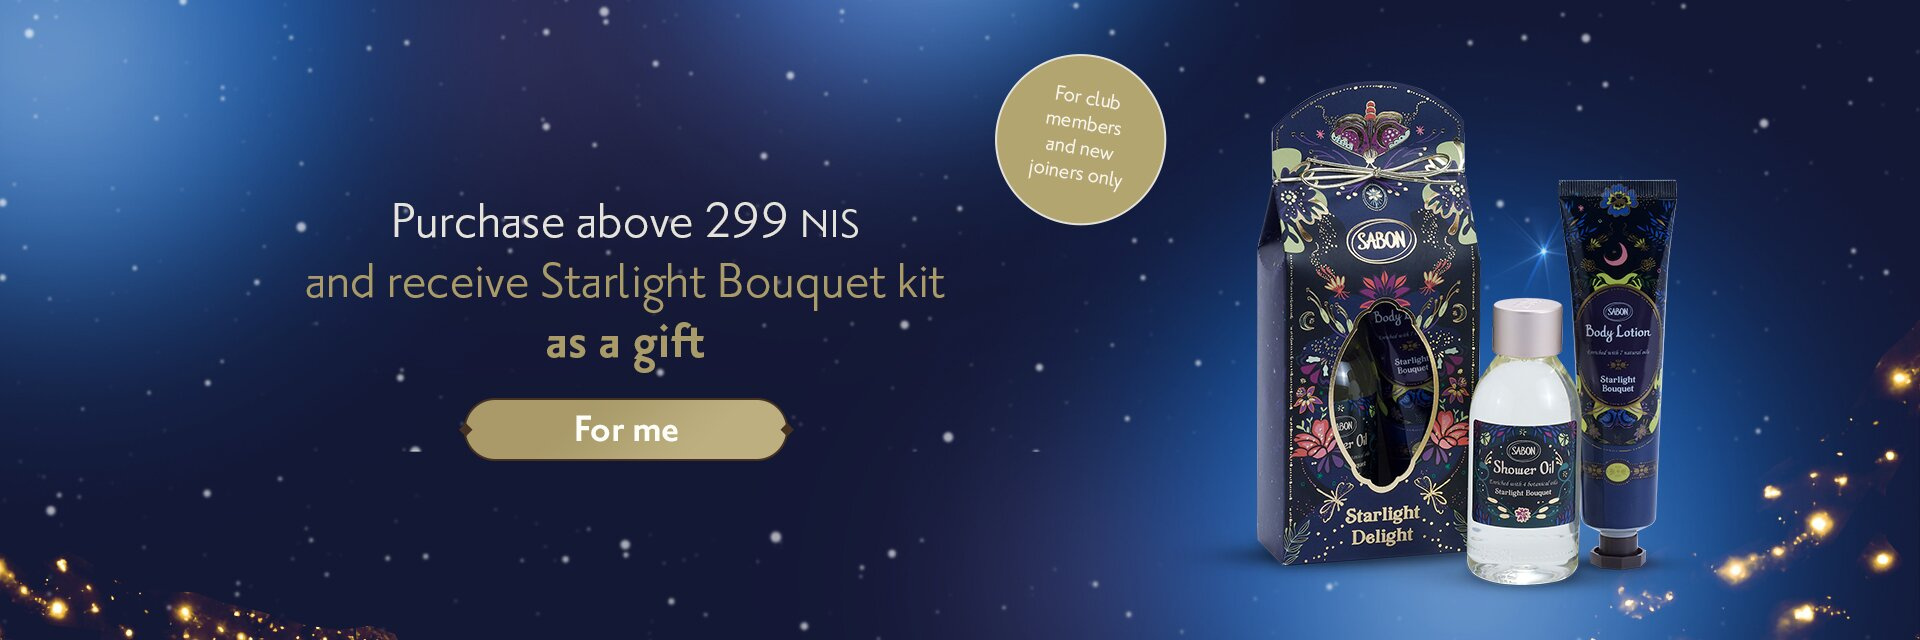 Buy over NIS 299 get a kit with the new Scent as a gift! Beyond the page with a variety of produ: 